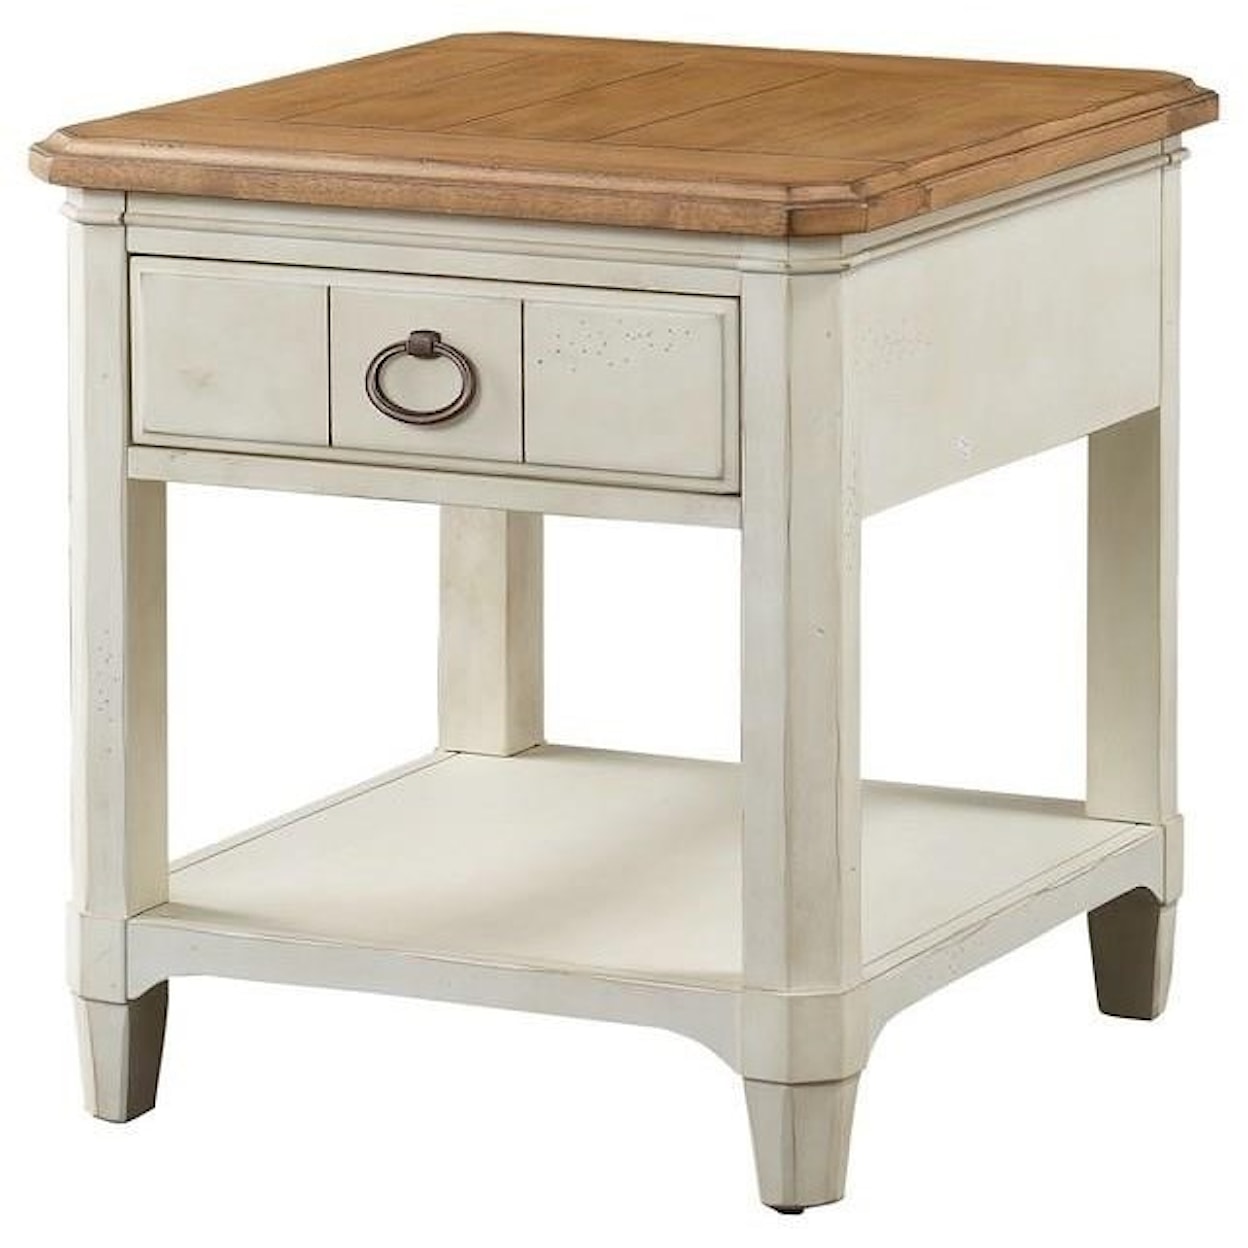 Panama Jack by Palmetto Home Millbrook Rectangular End Table